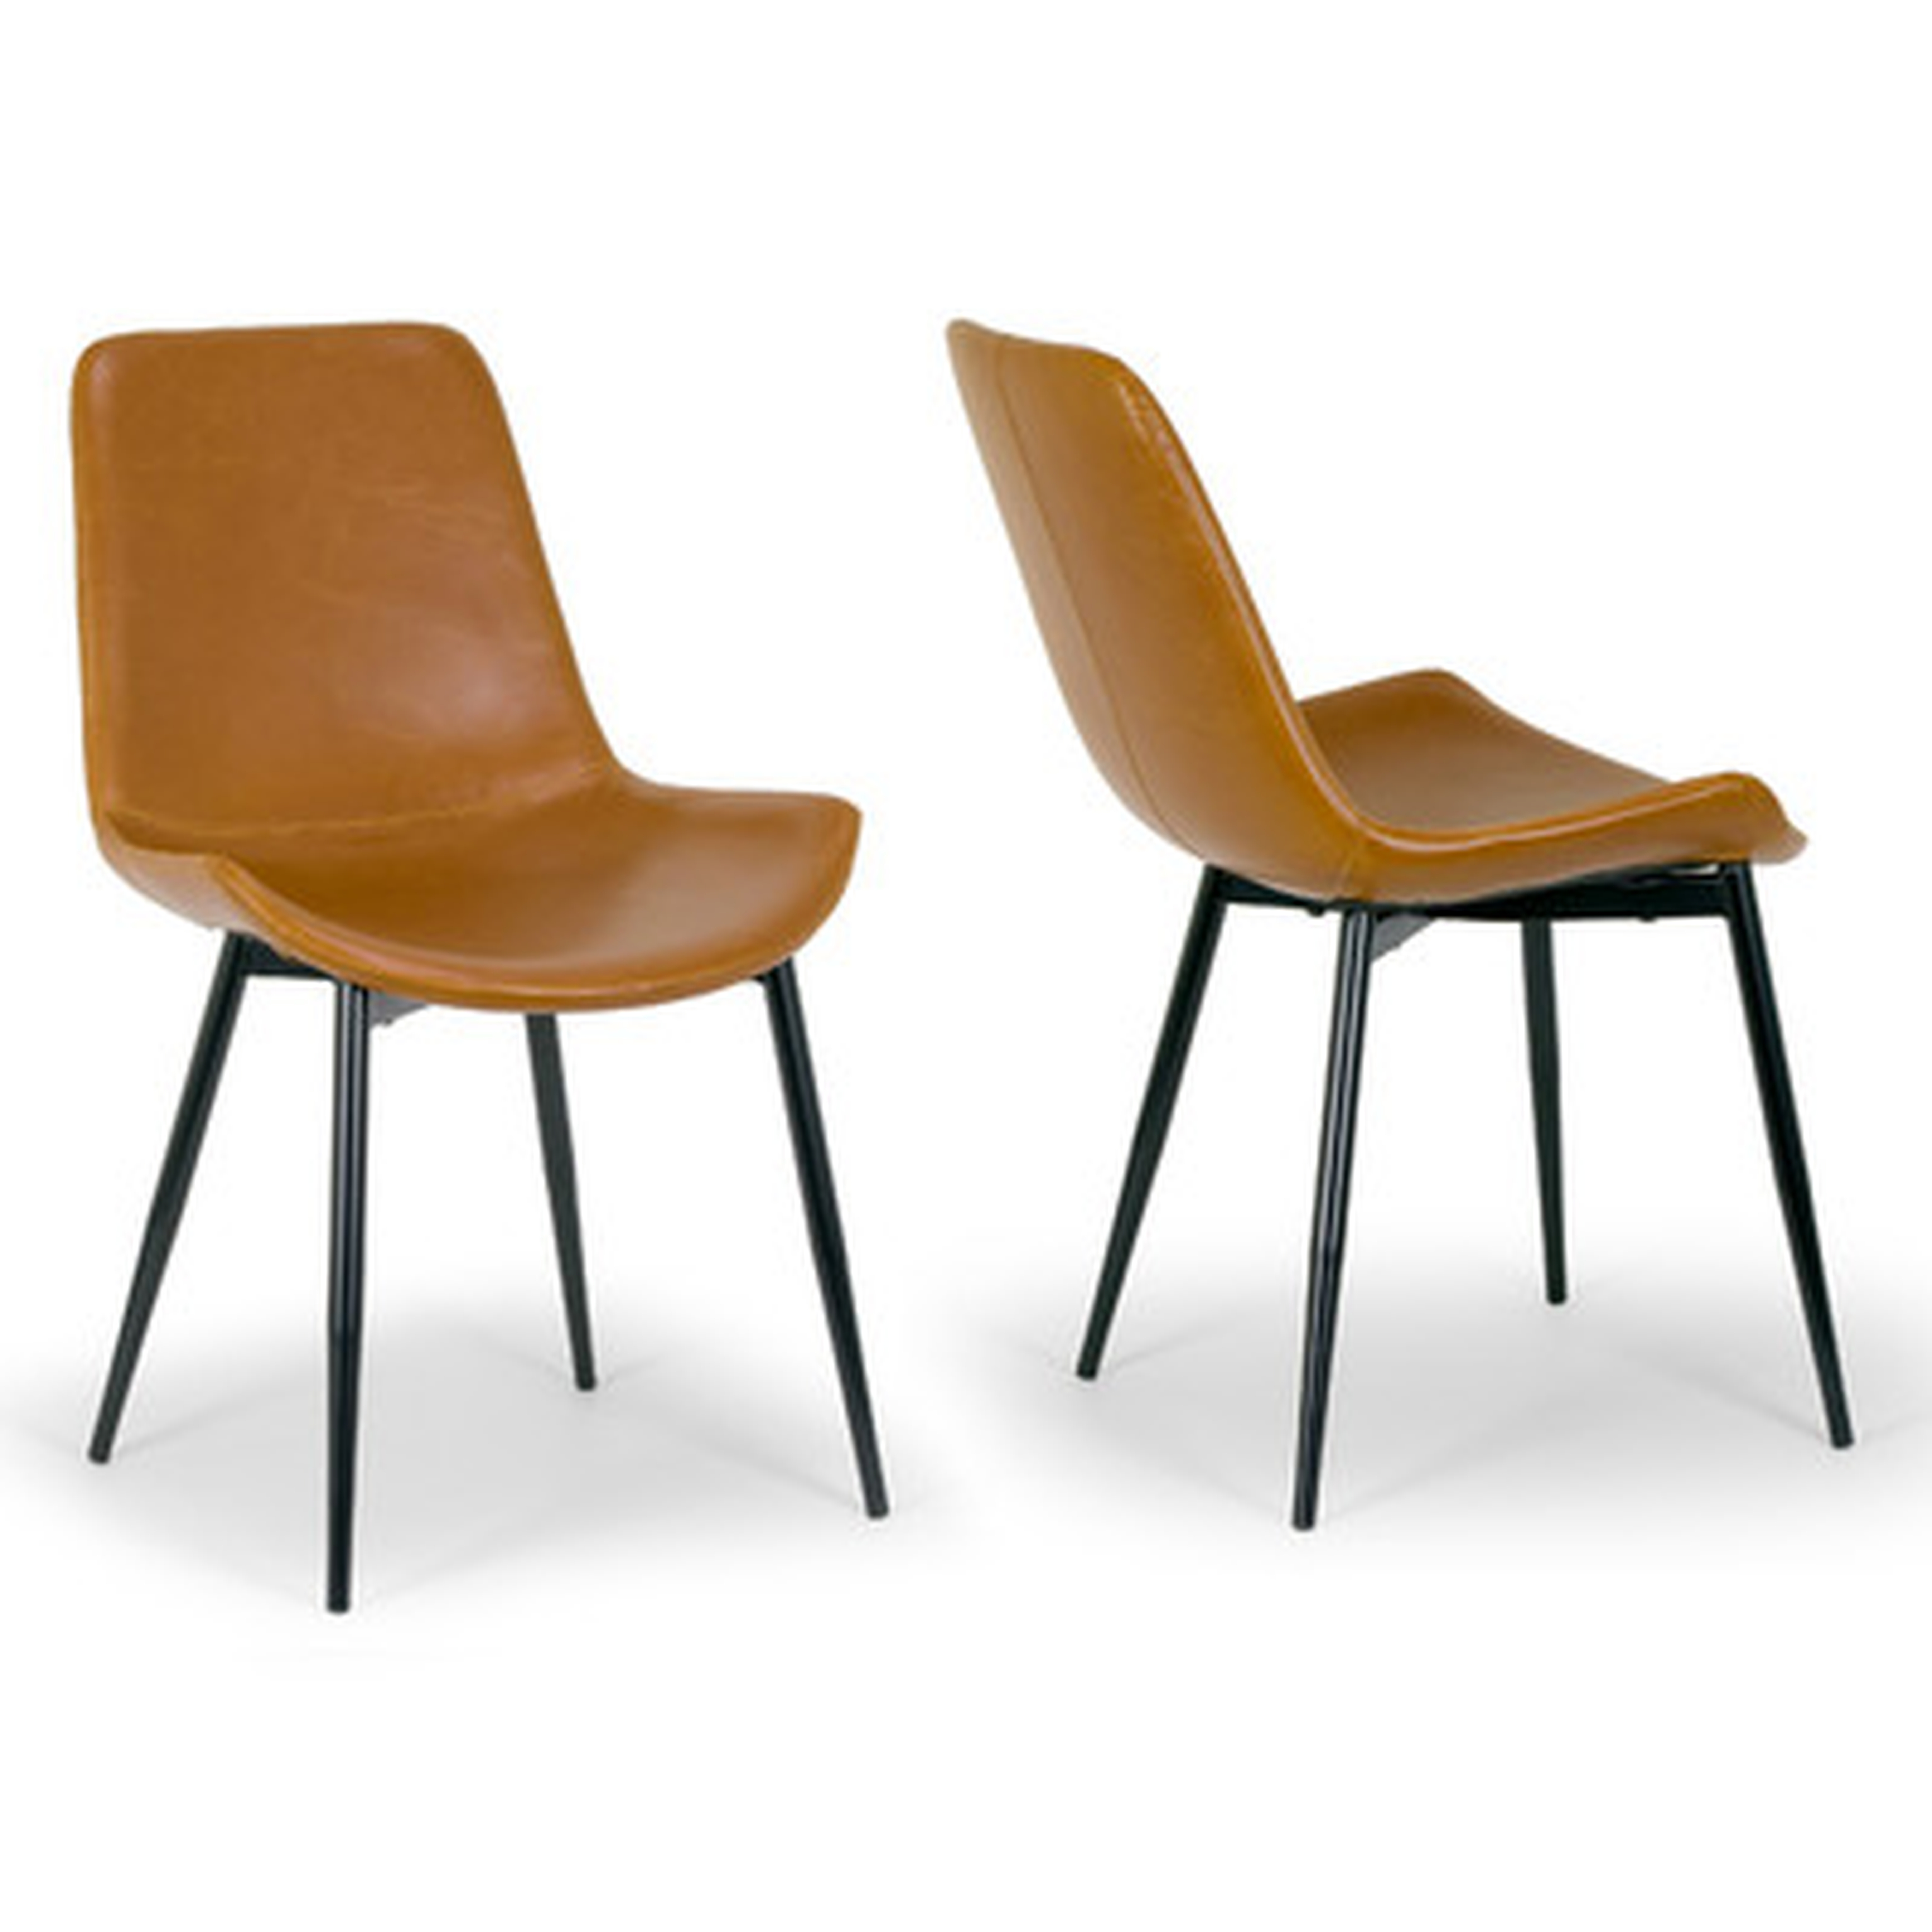 Alary Faux Leather Modern Side Chair - Set of 2 - Wayfair